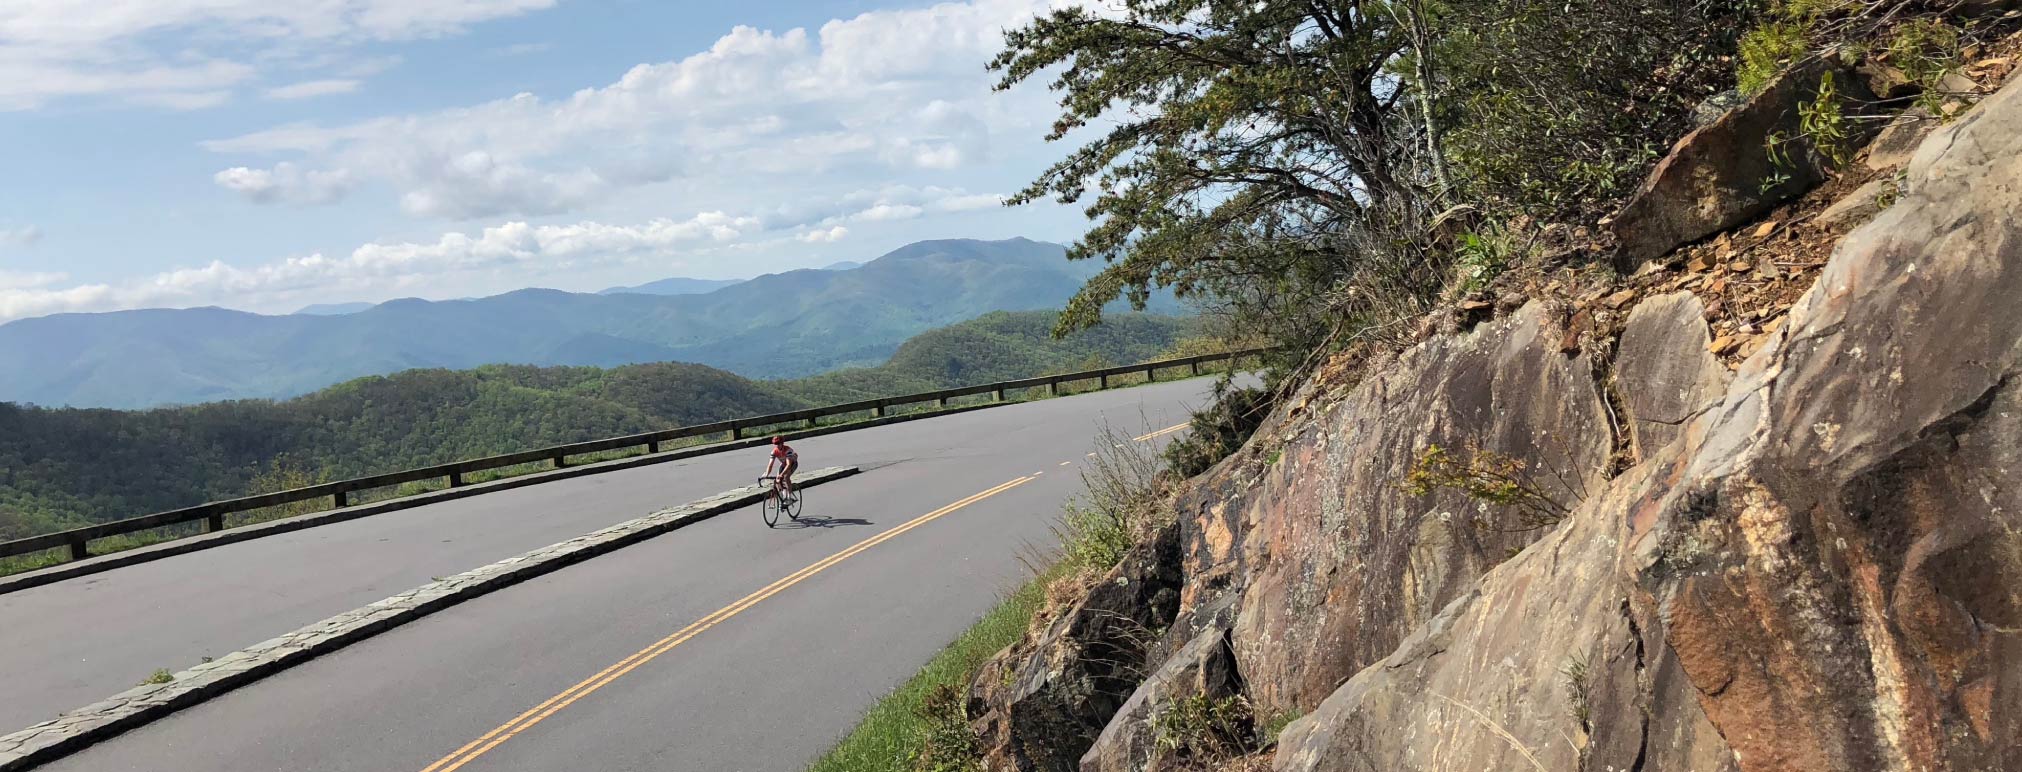 person cycling on a paved road through North Carolina with a mountain view